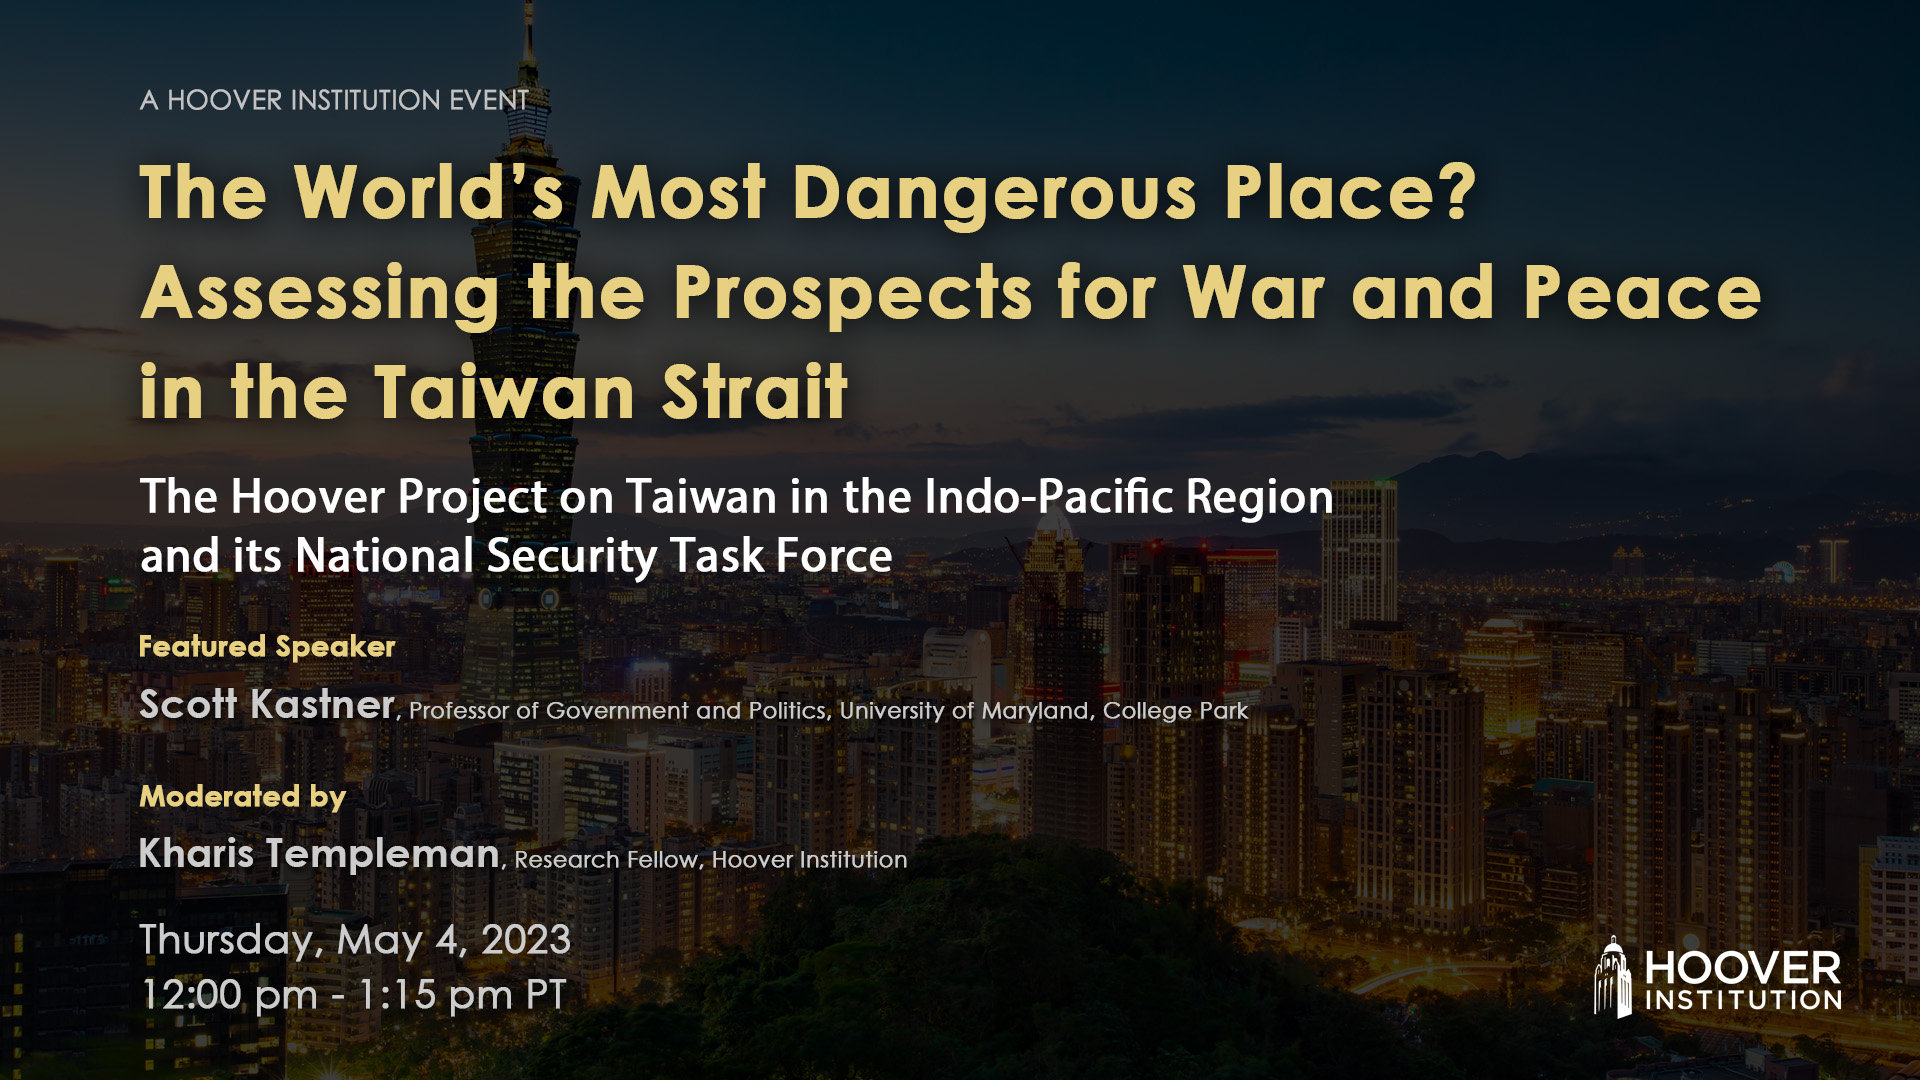 The World’s Most Dangerous Place? Assessing the Prospects for War and Peace in the Taiwan Strait, May 4, 2023